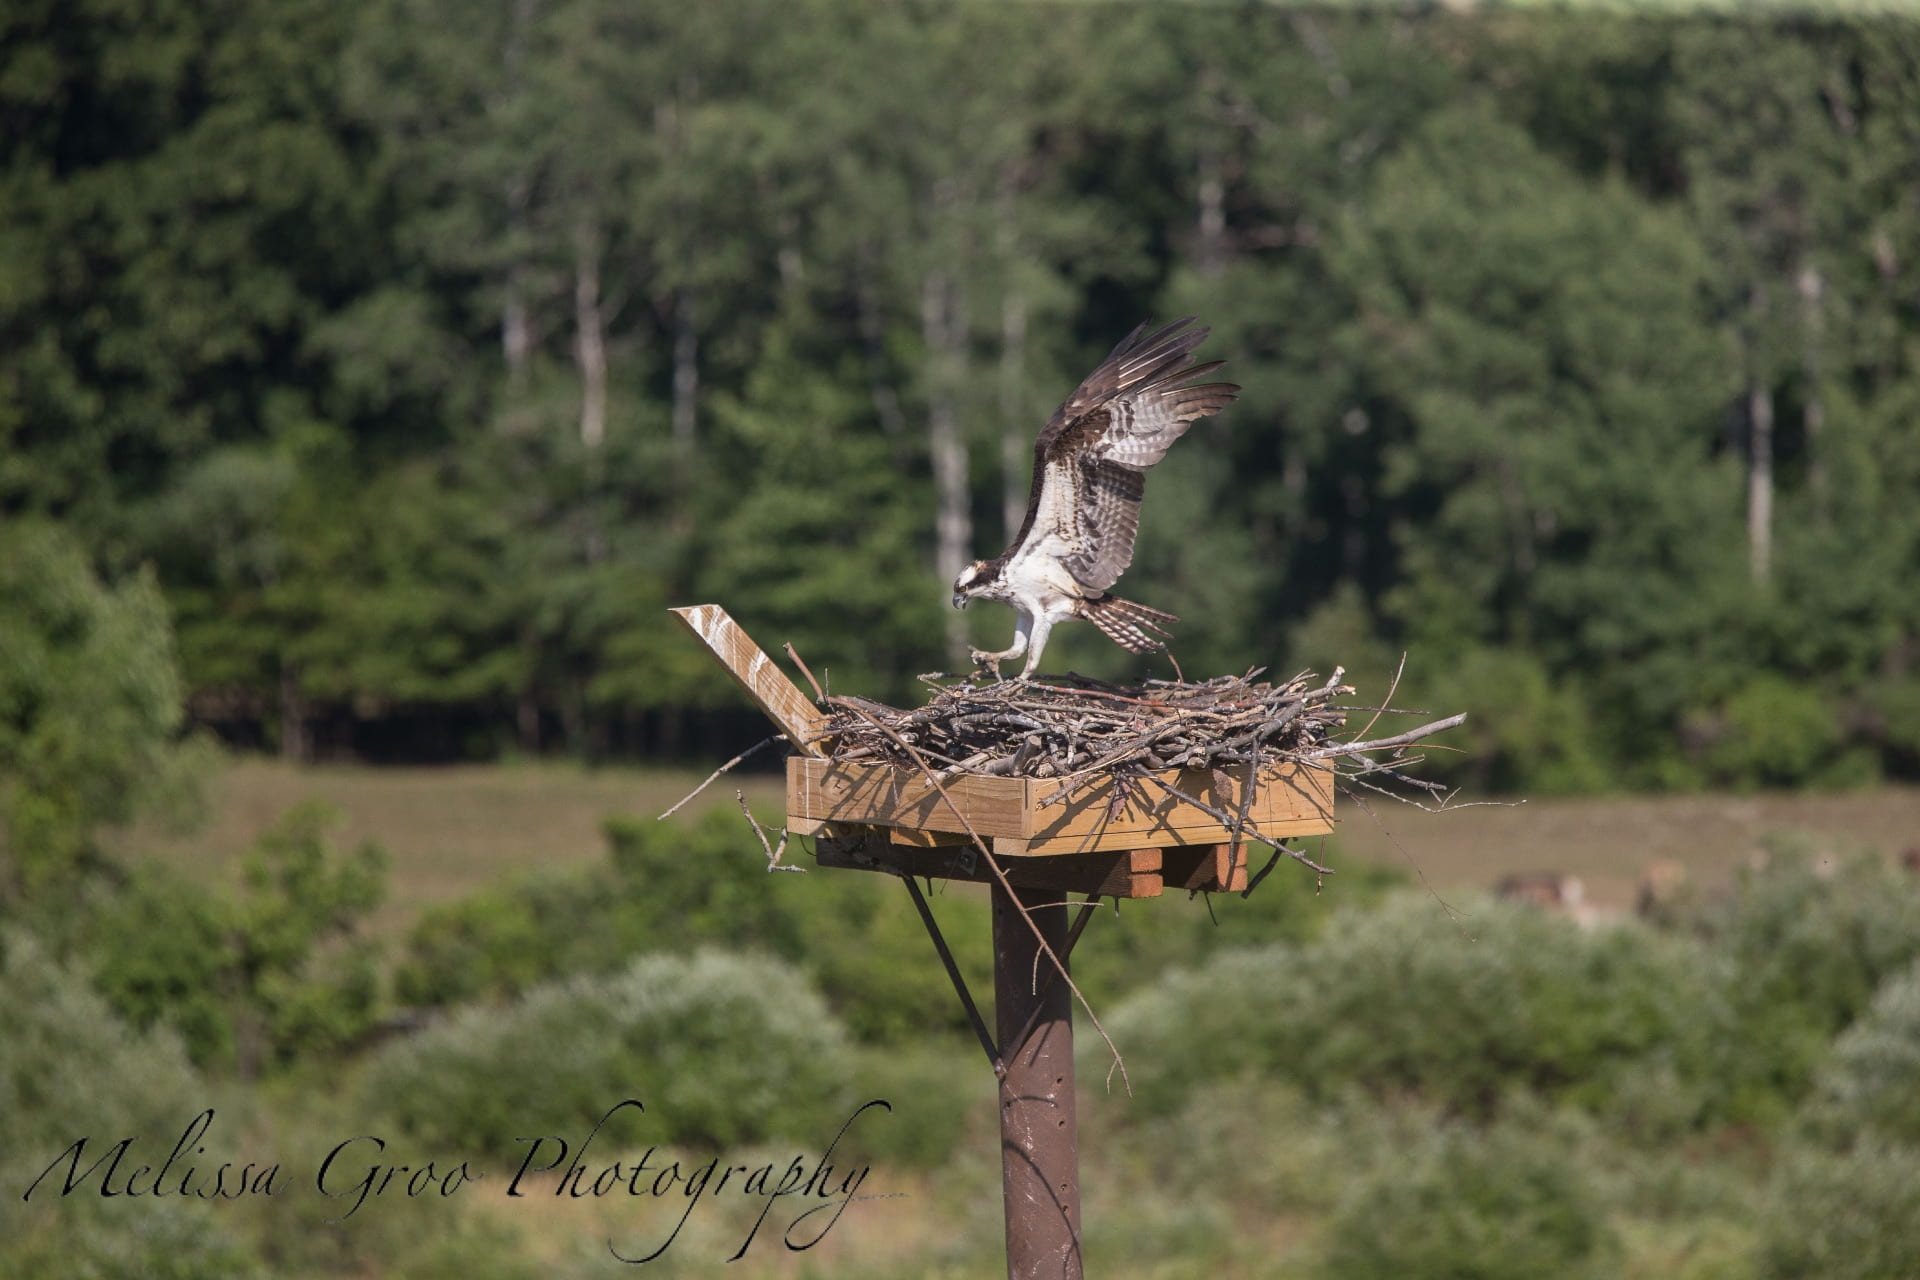 An Osprey flies into the nest at the experimental ponds facility.